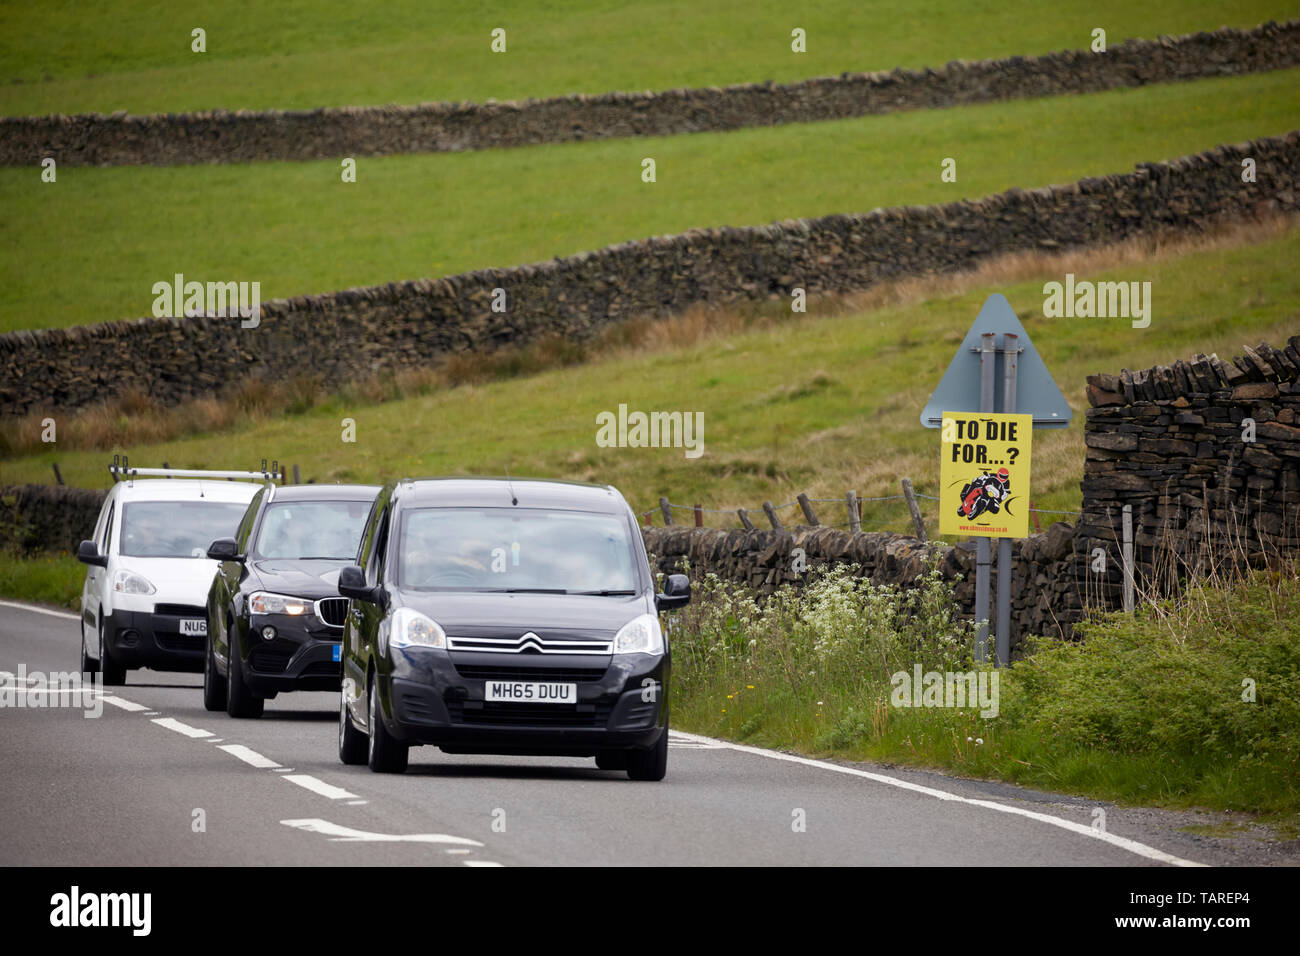 A57 snake pass in Glossop, Derbyshire dangerous road warning sign for motorbike riders To Die For Stock Photo